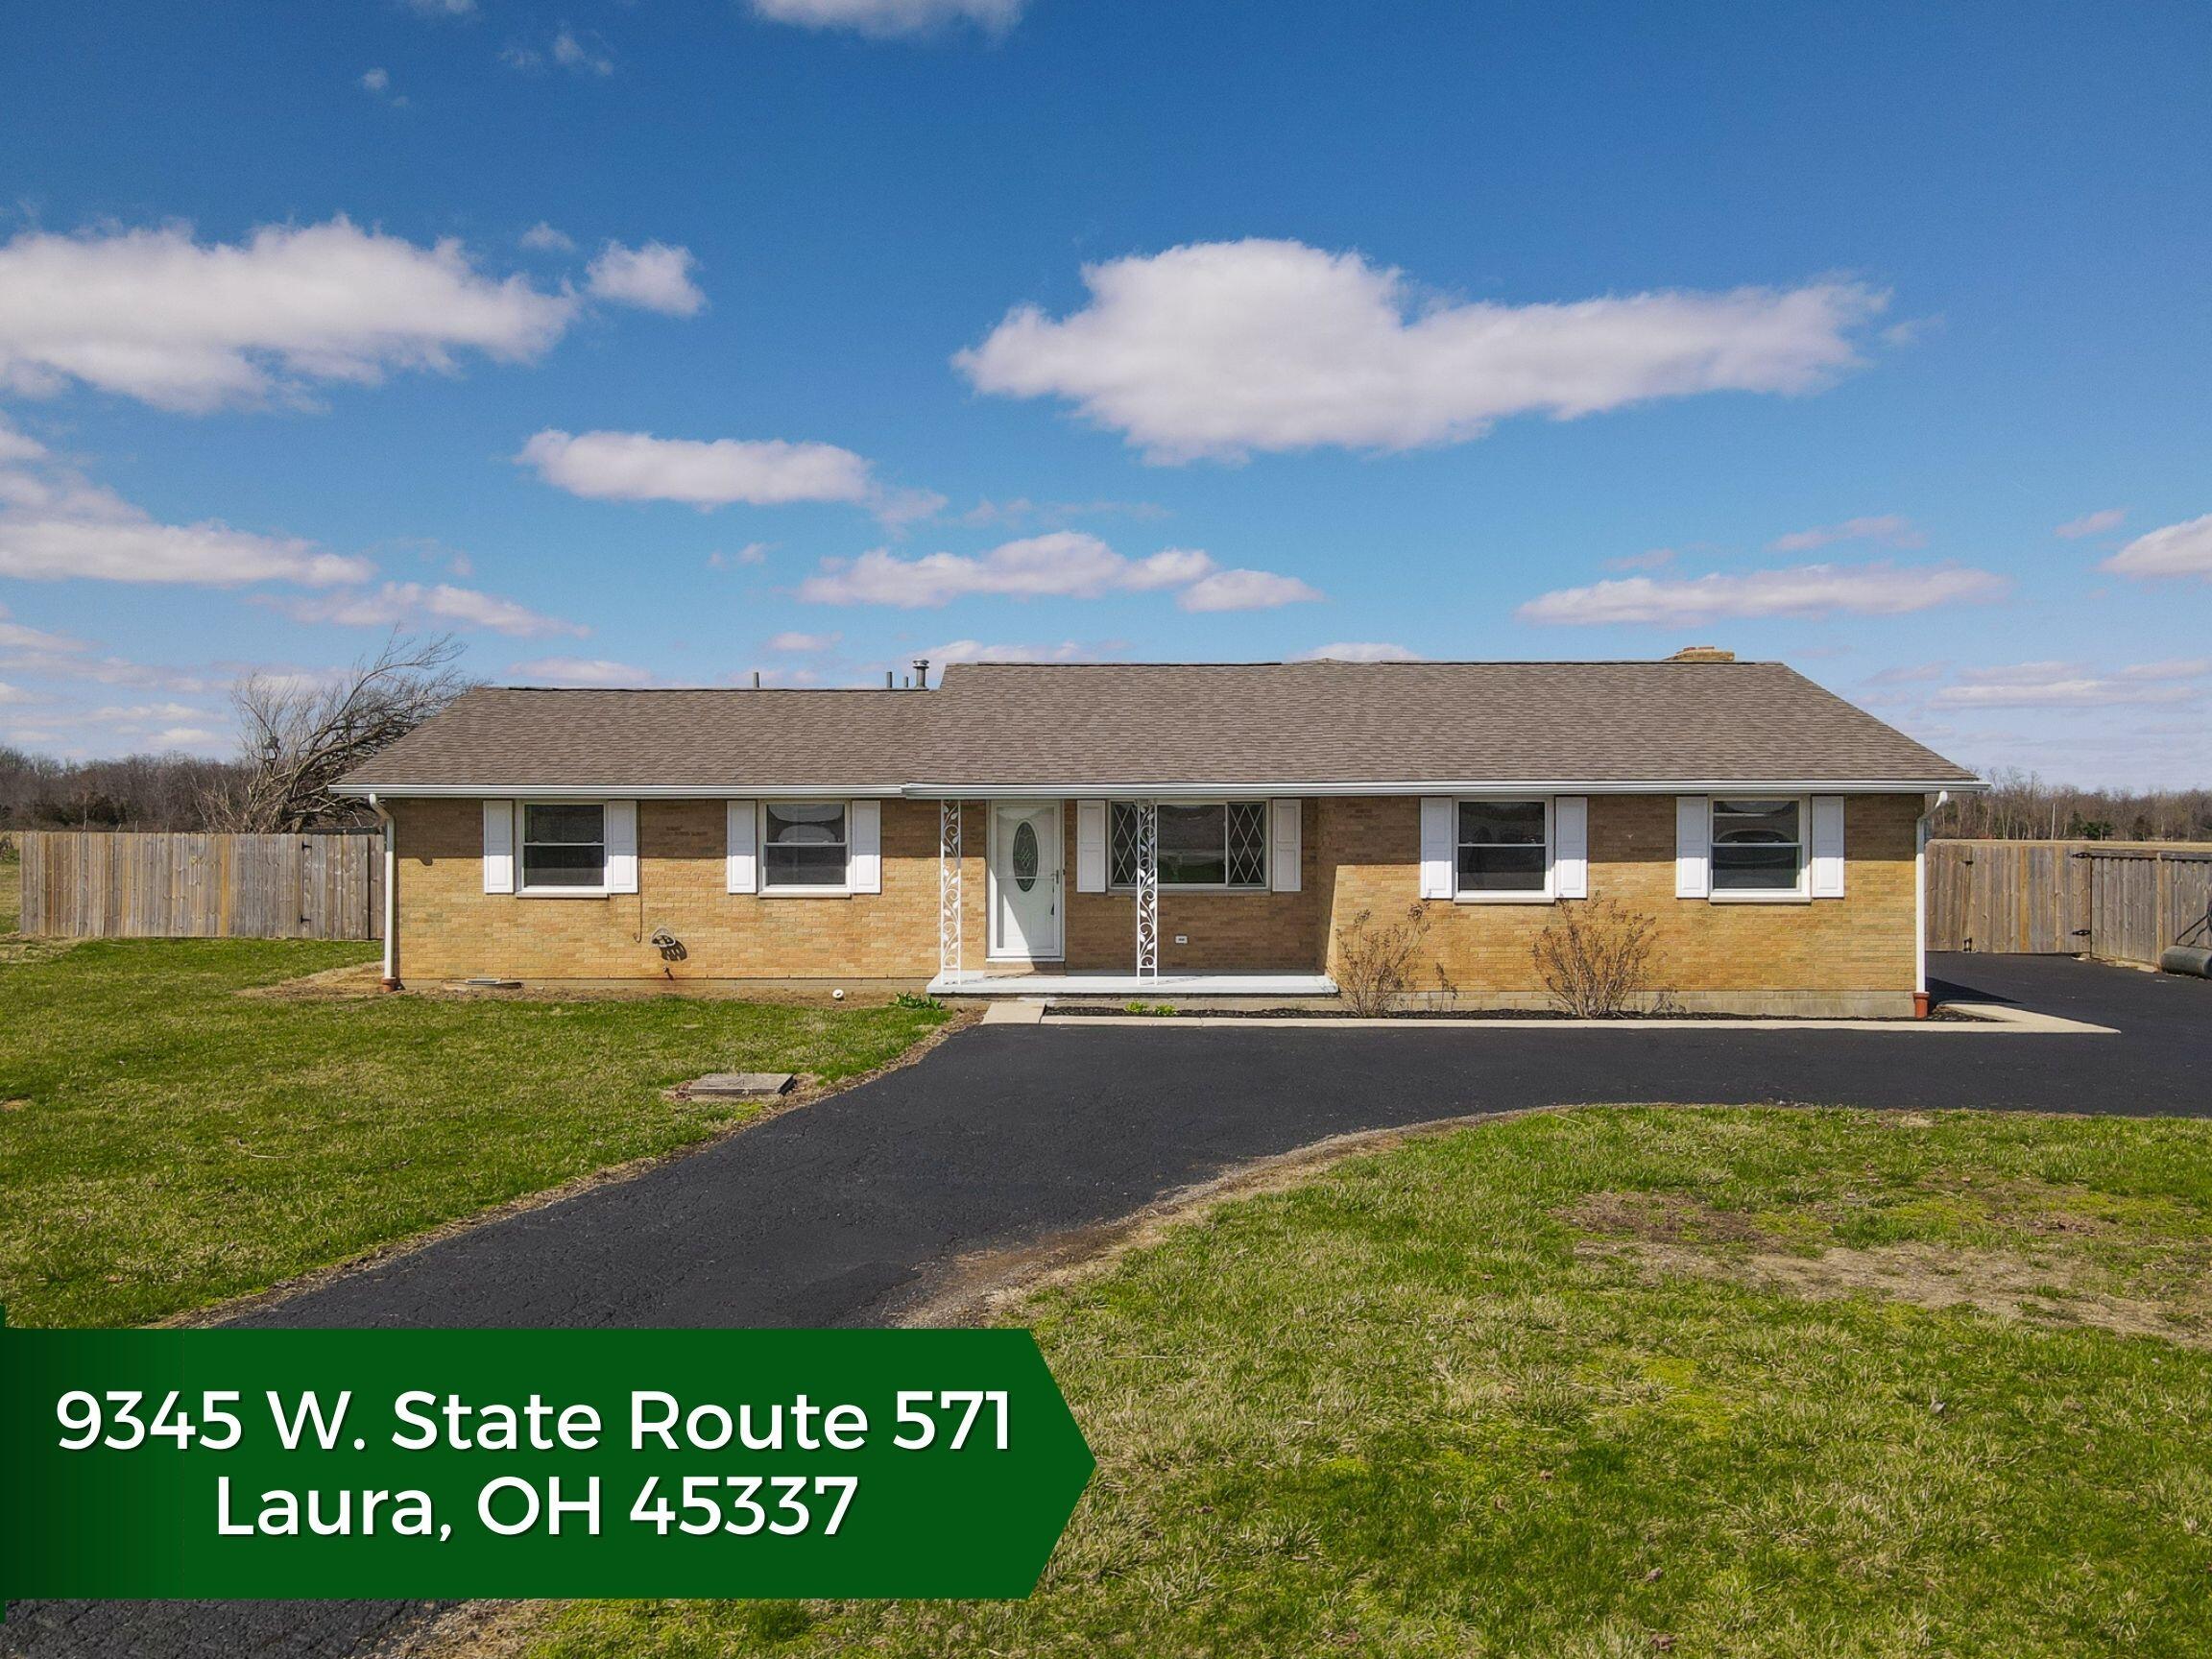 9345 State Route 571 Laura, OH